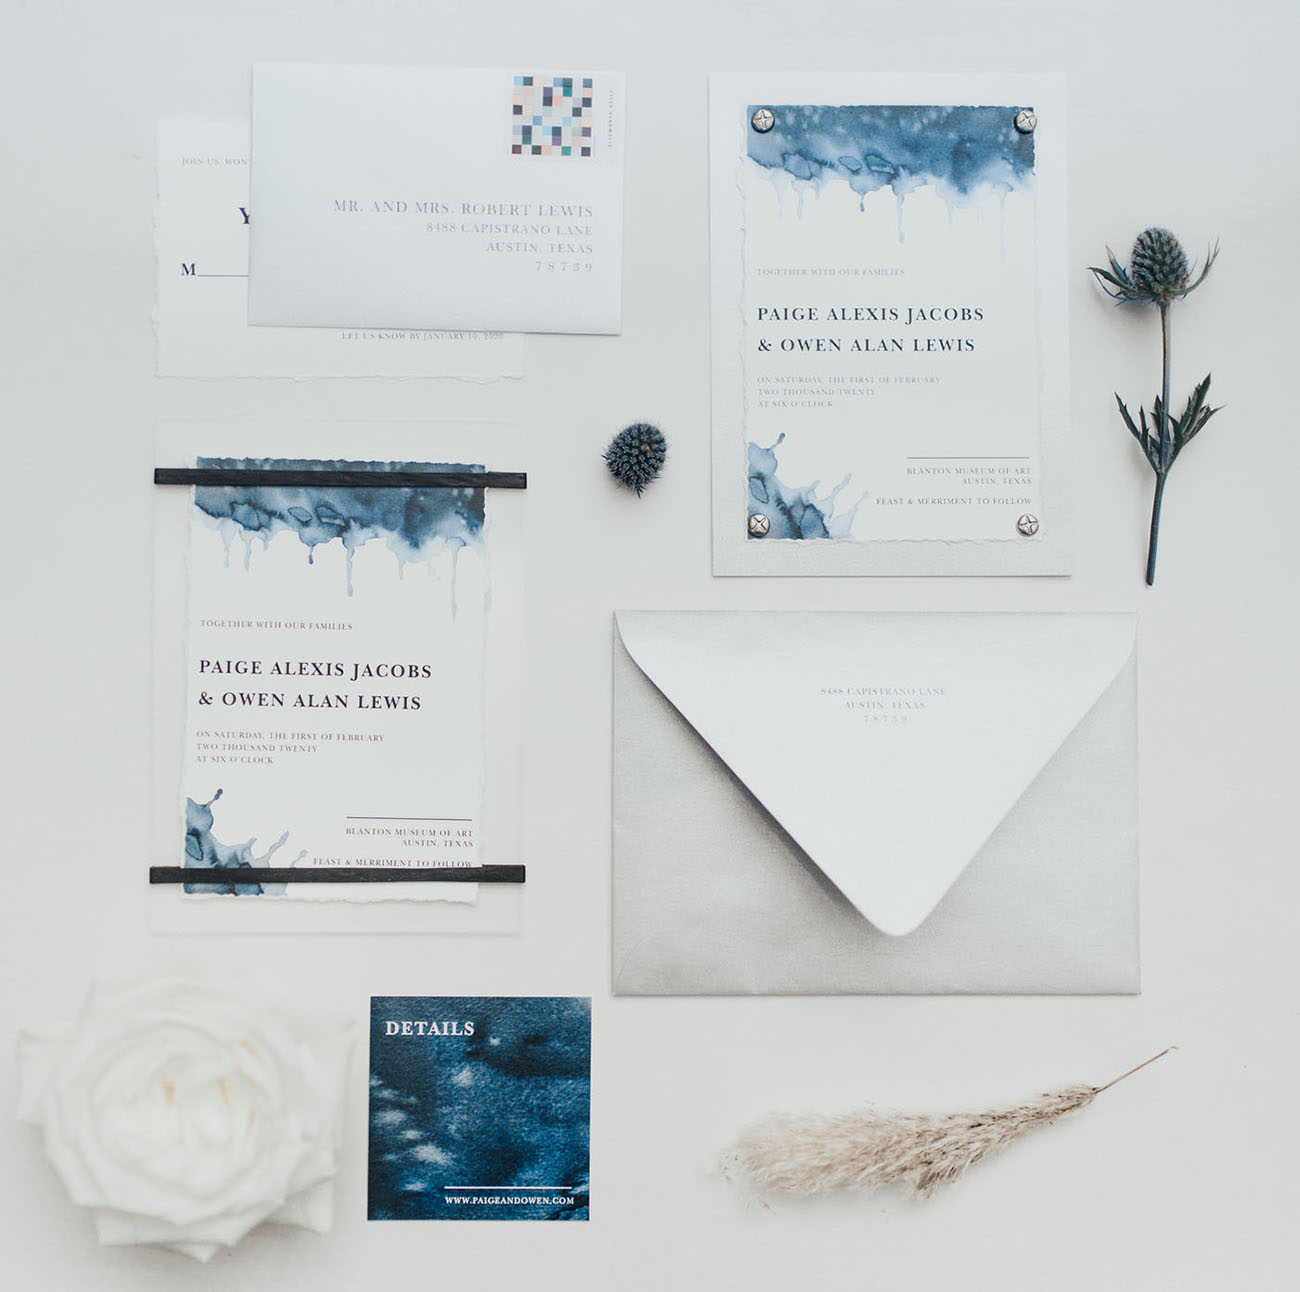 The wedding stationery was done with watercolors and various shades of blue